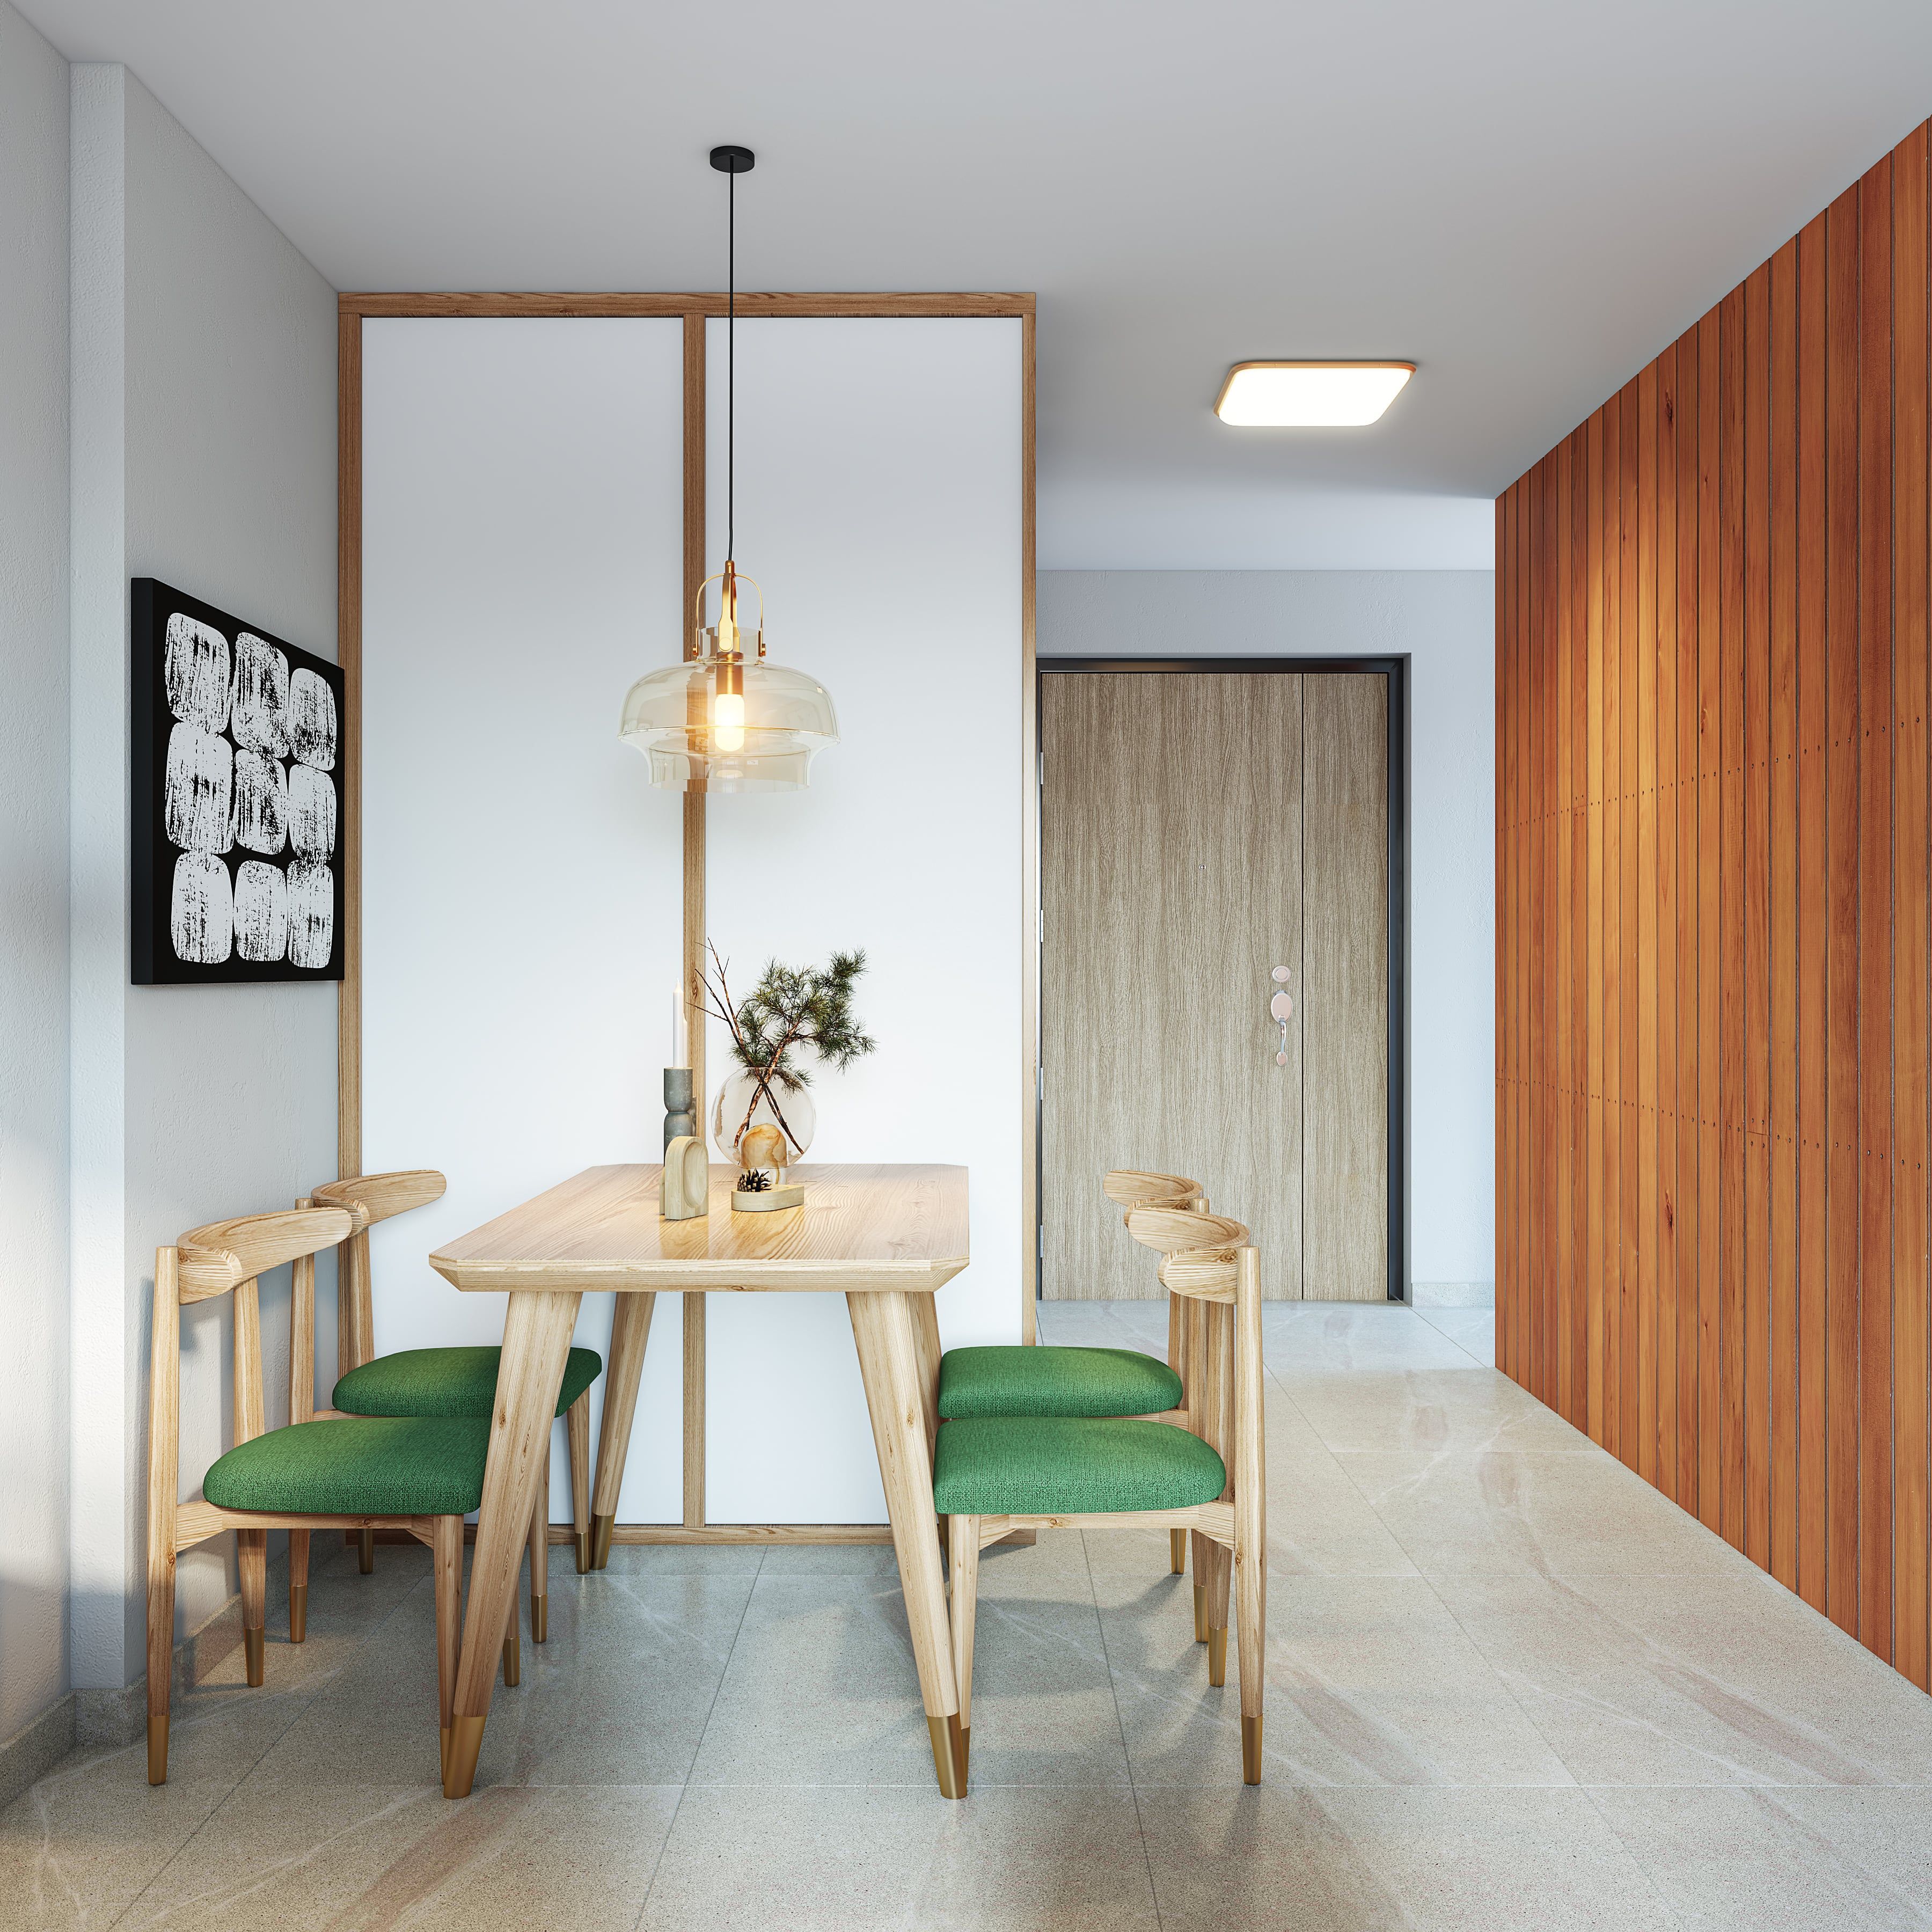 Mid-Century Modern Dining Room Design With A Wooden 8-Seater Table